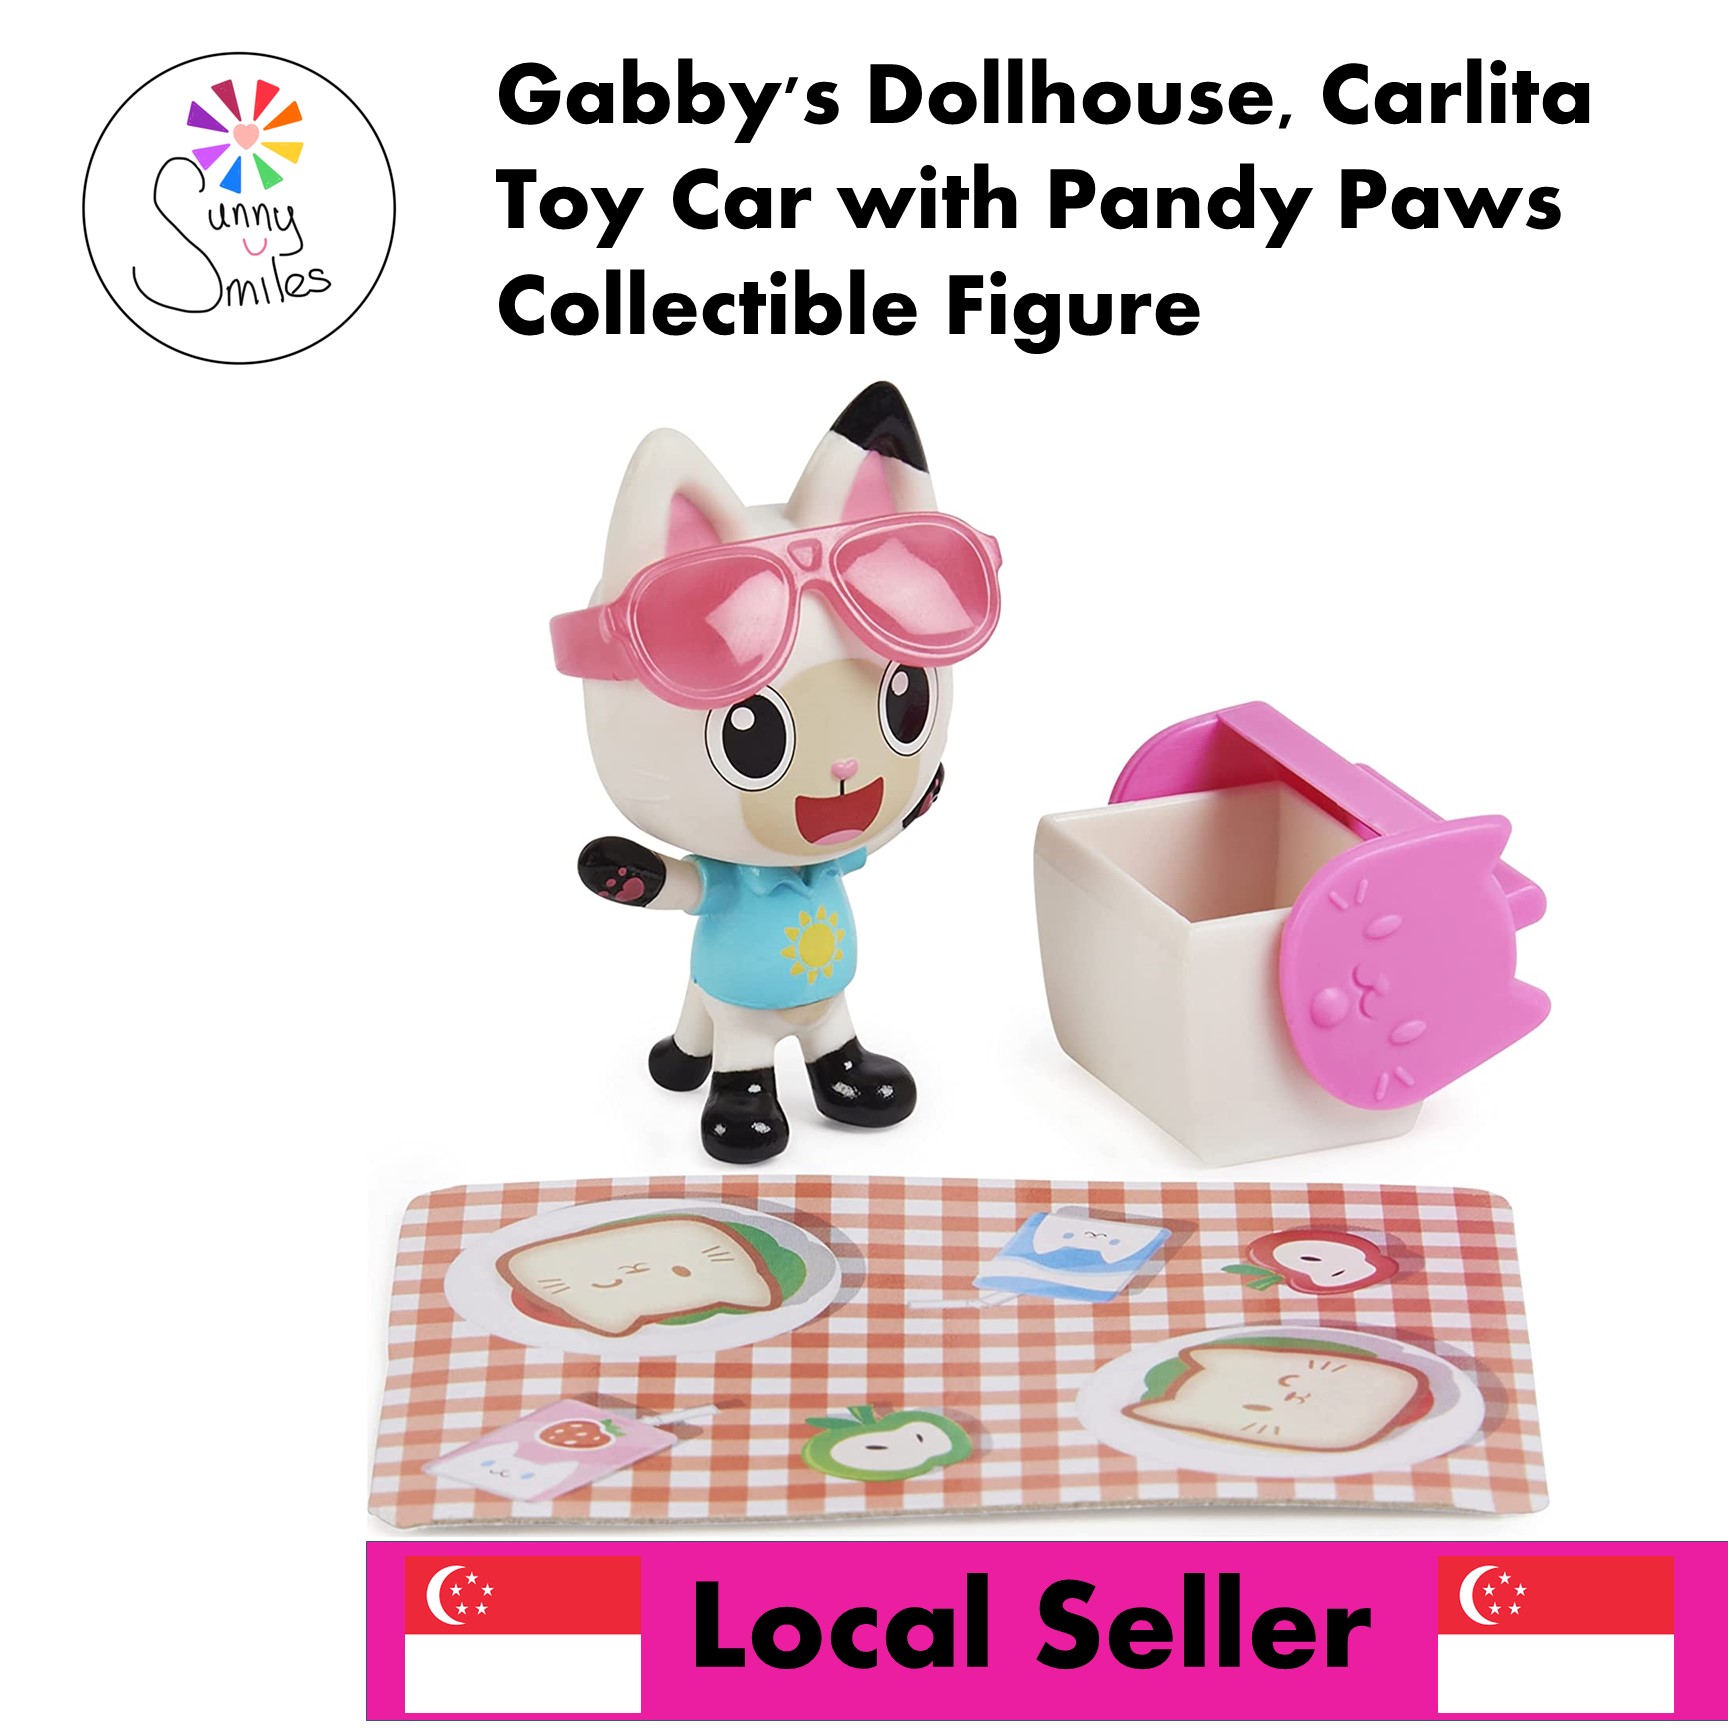 Gabby's Dollhouse, Carlita Toy Car with Pandy Paws Collectible